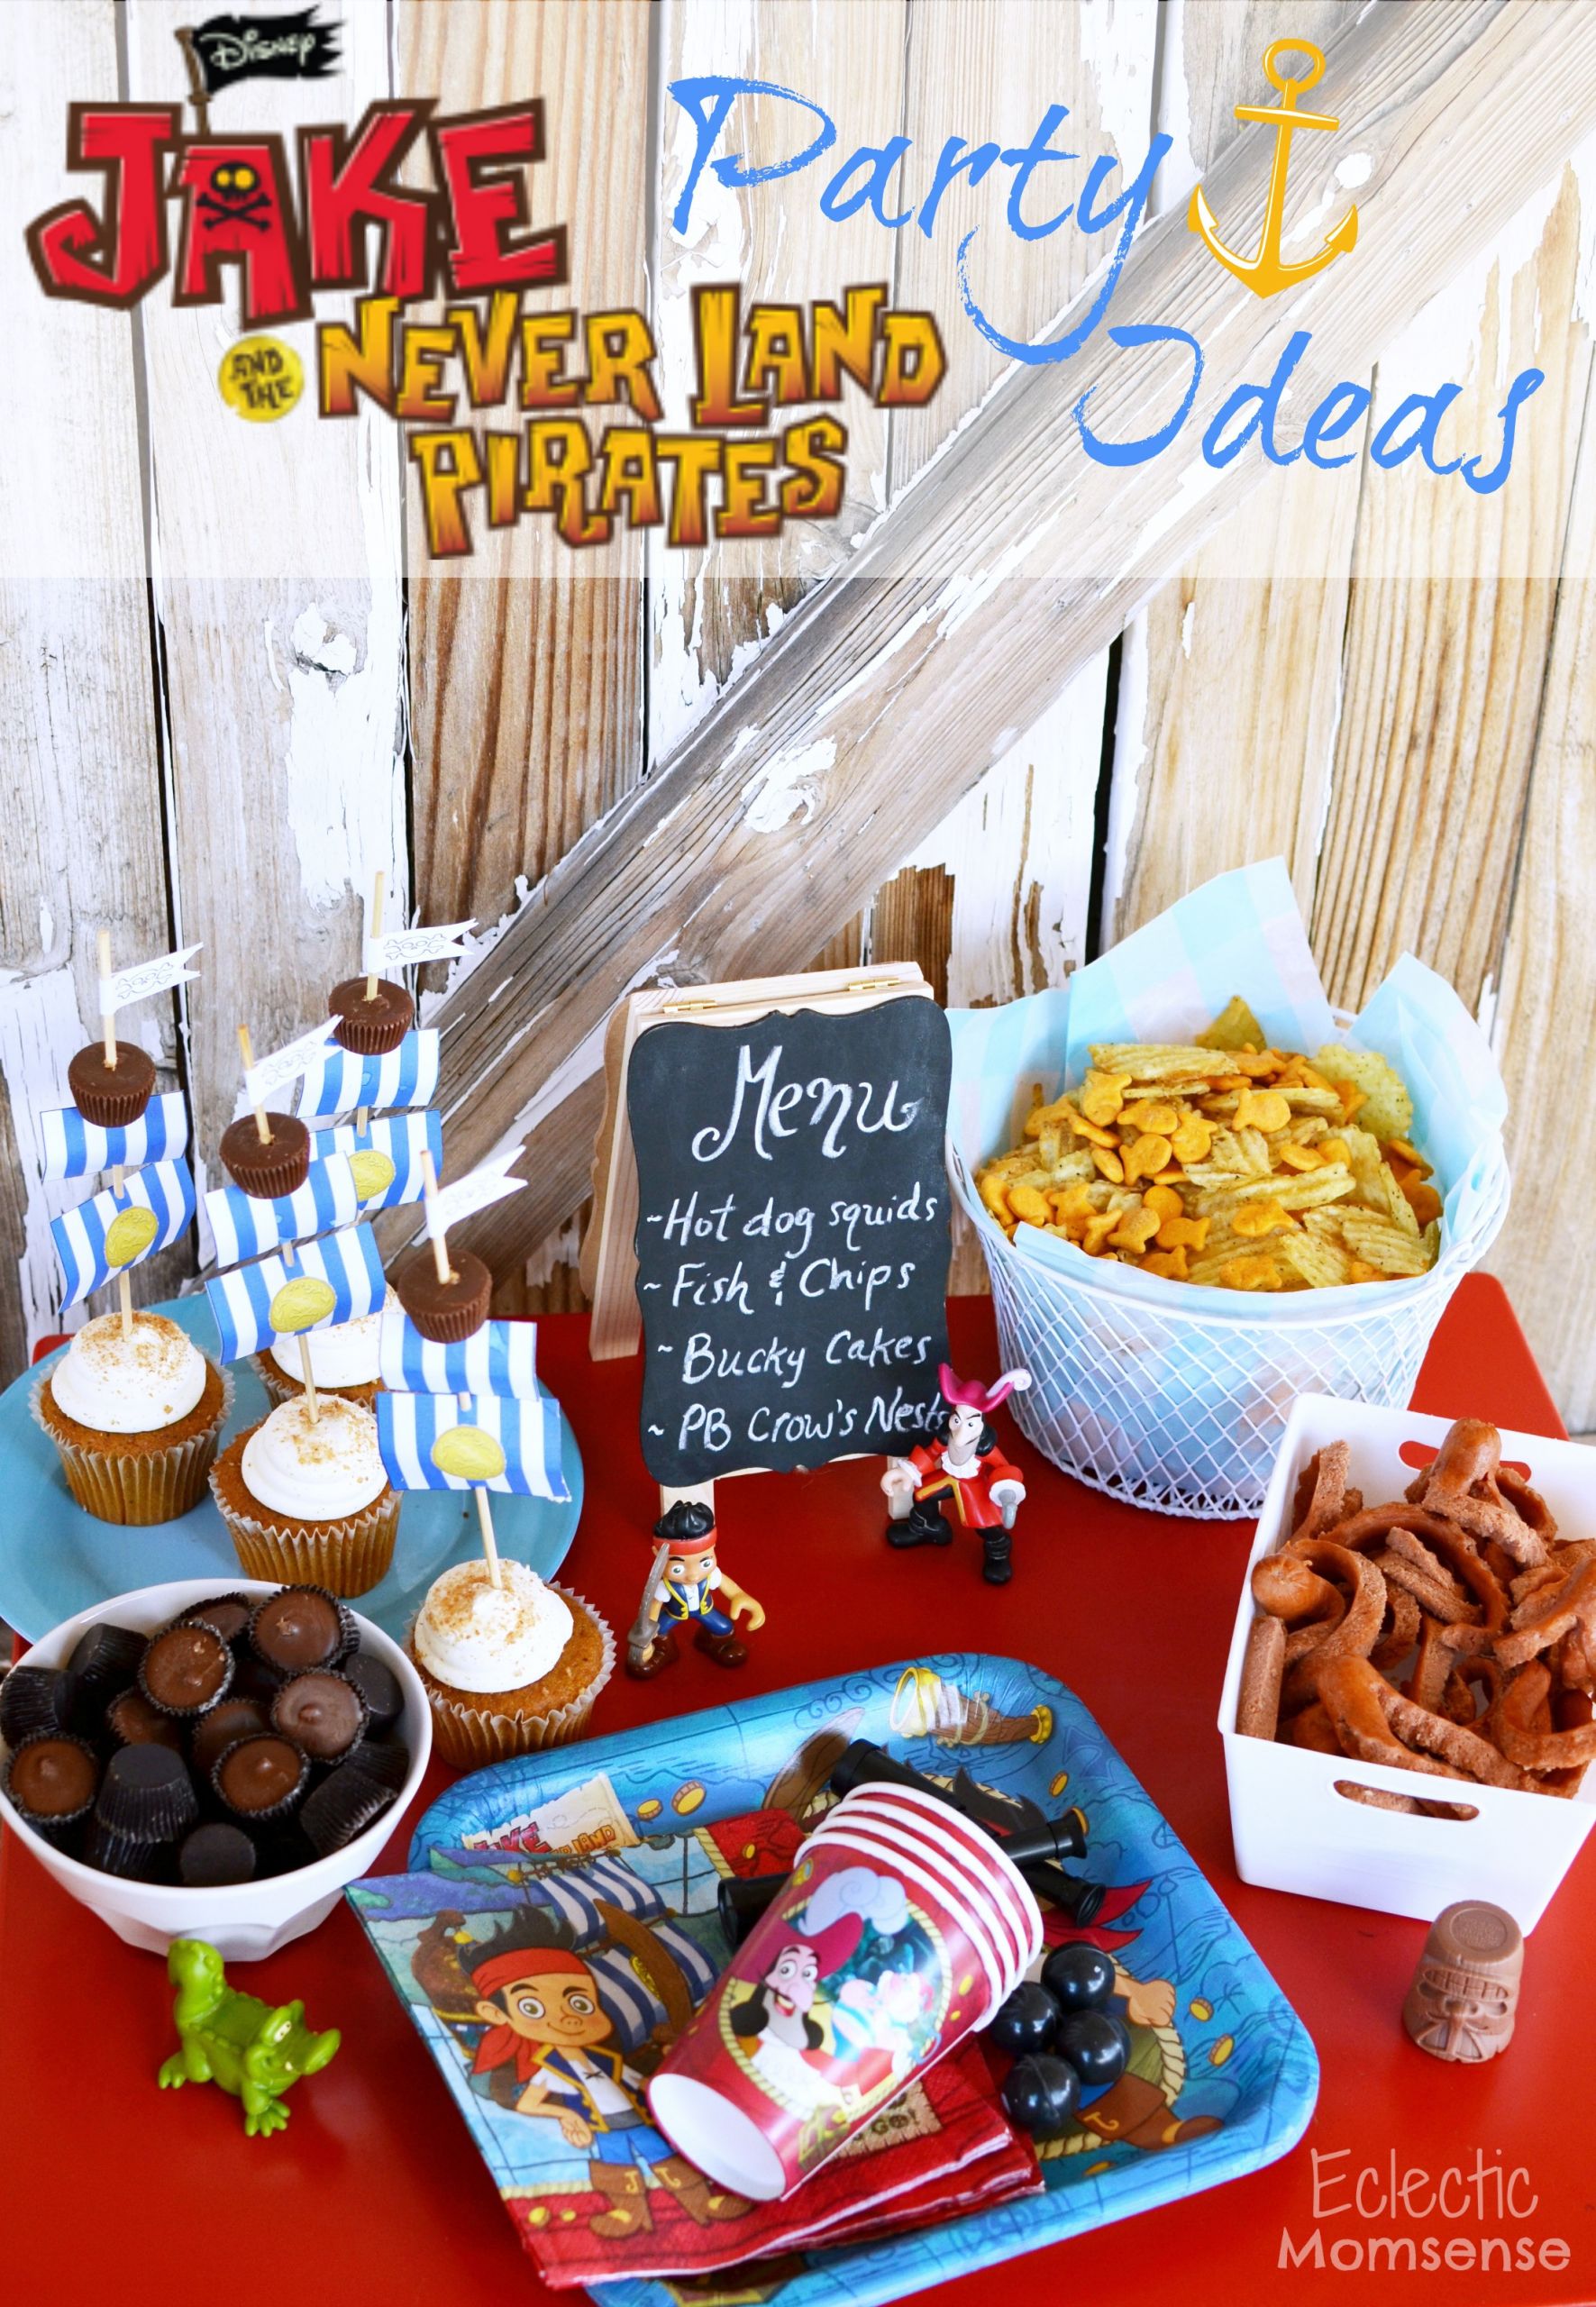 Jake And The Neverland Pirates Birthday Party Food Ideas
 Easy Jake and the Neverland Pirates Party Ideas Eclectic